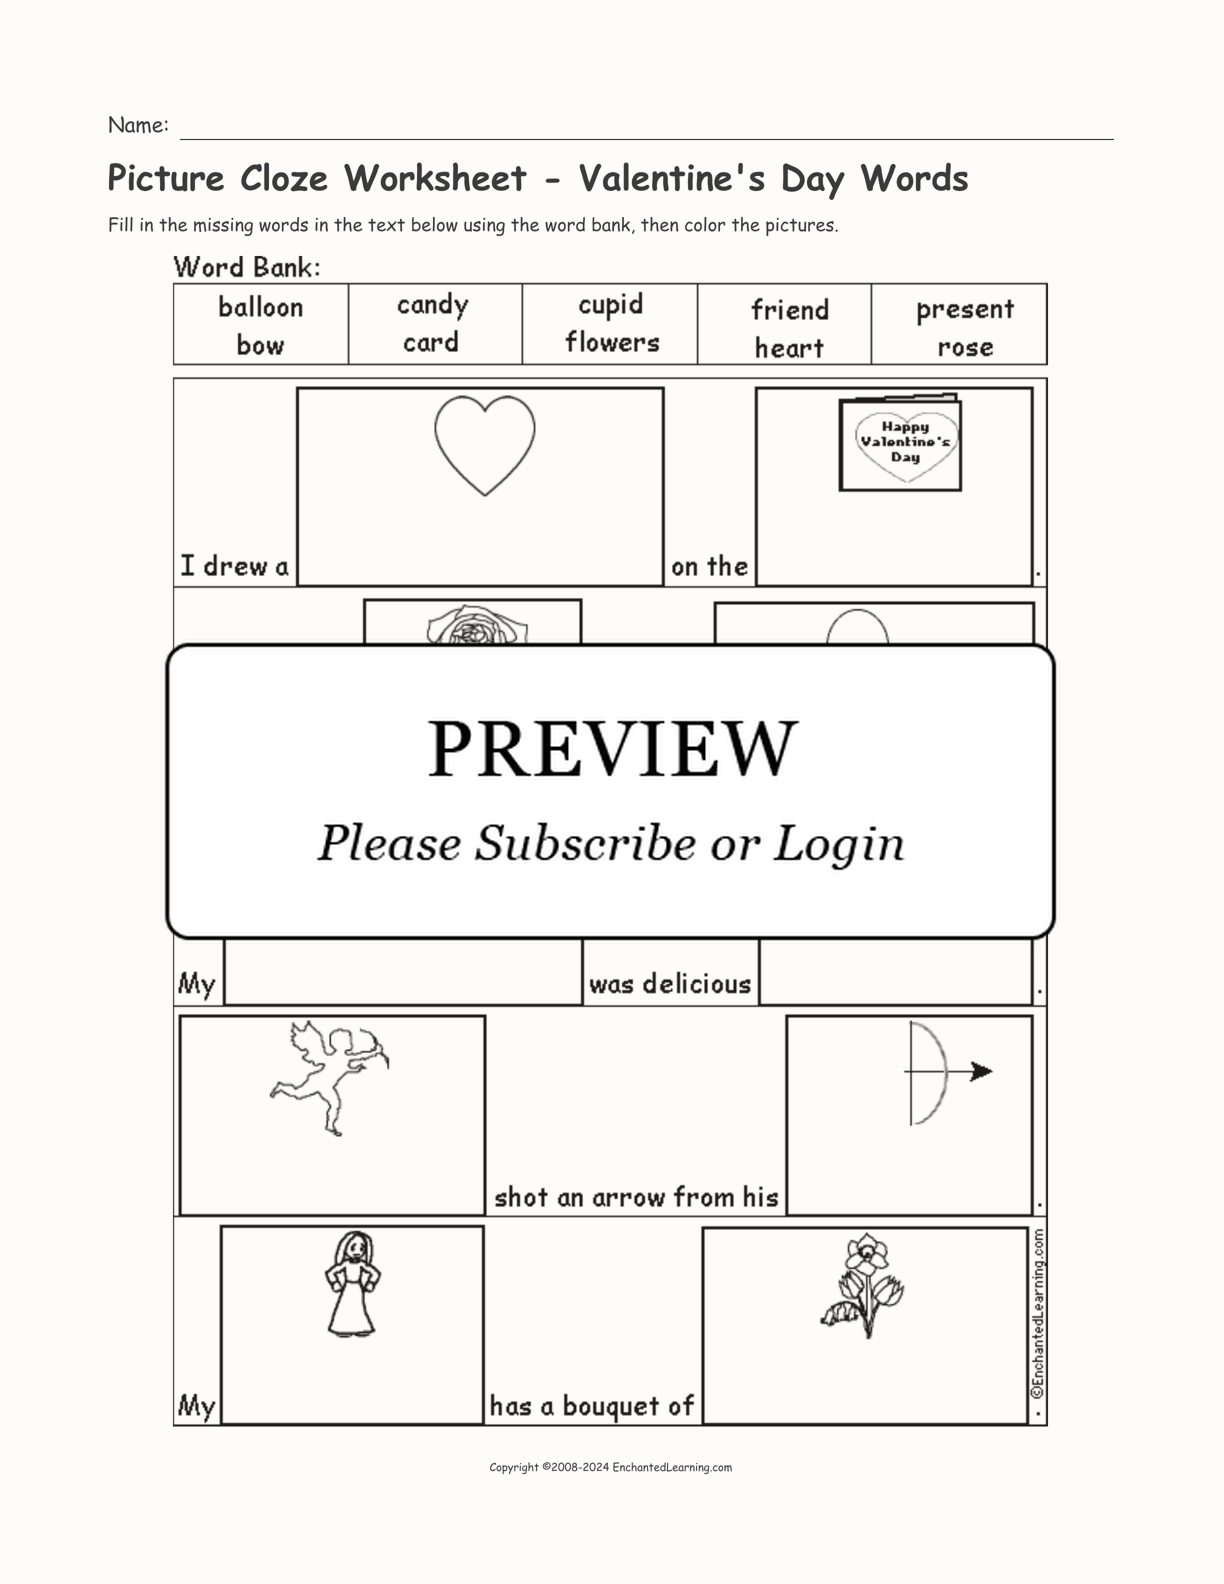 Picture Cloze Worksheet - Valentine's Day Words interactive worksheet page 1